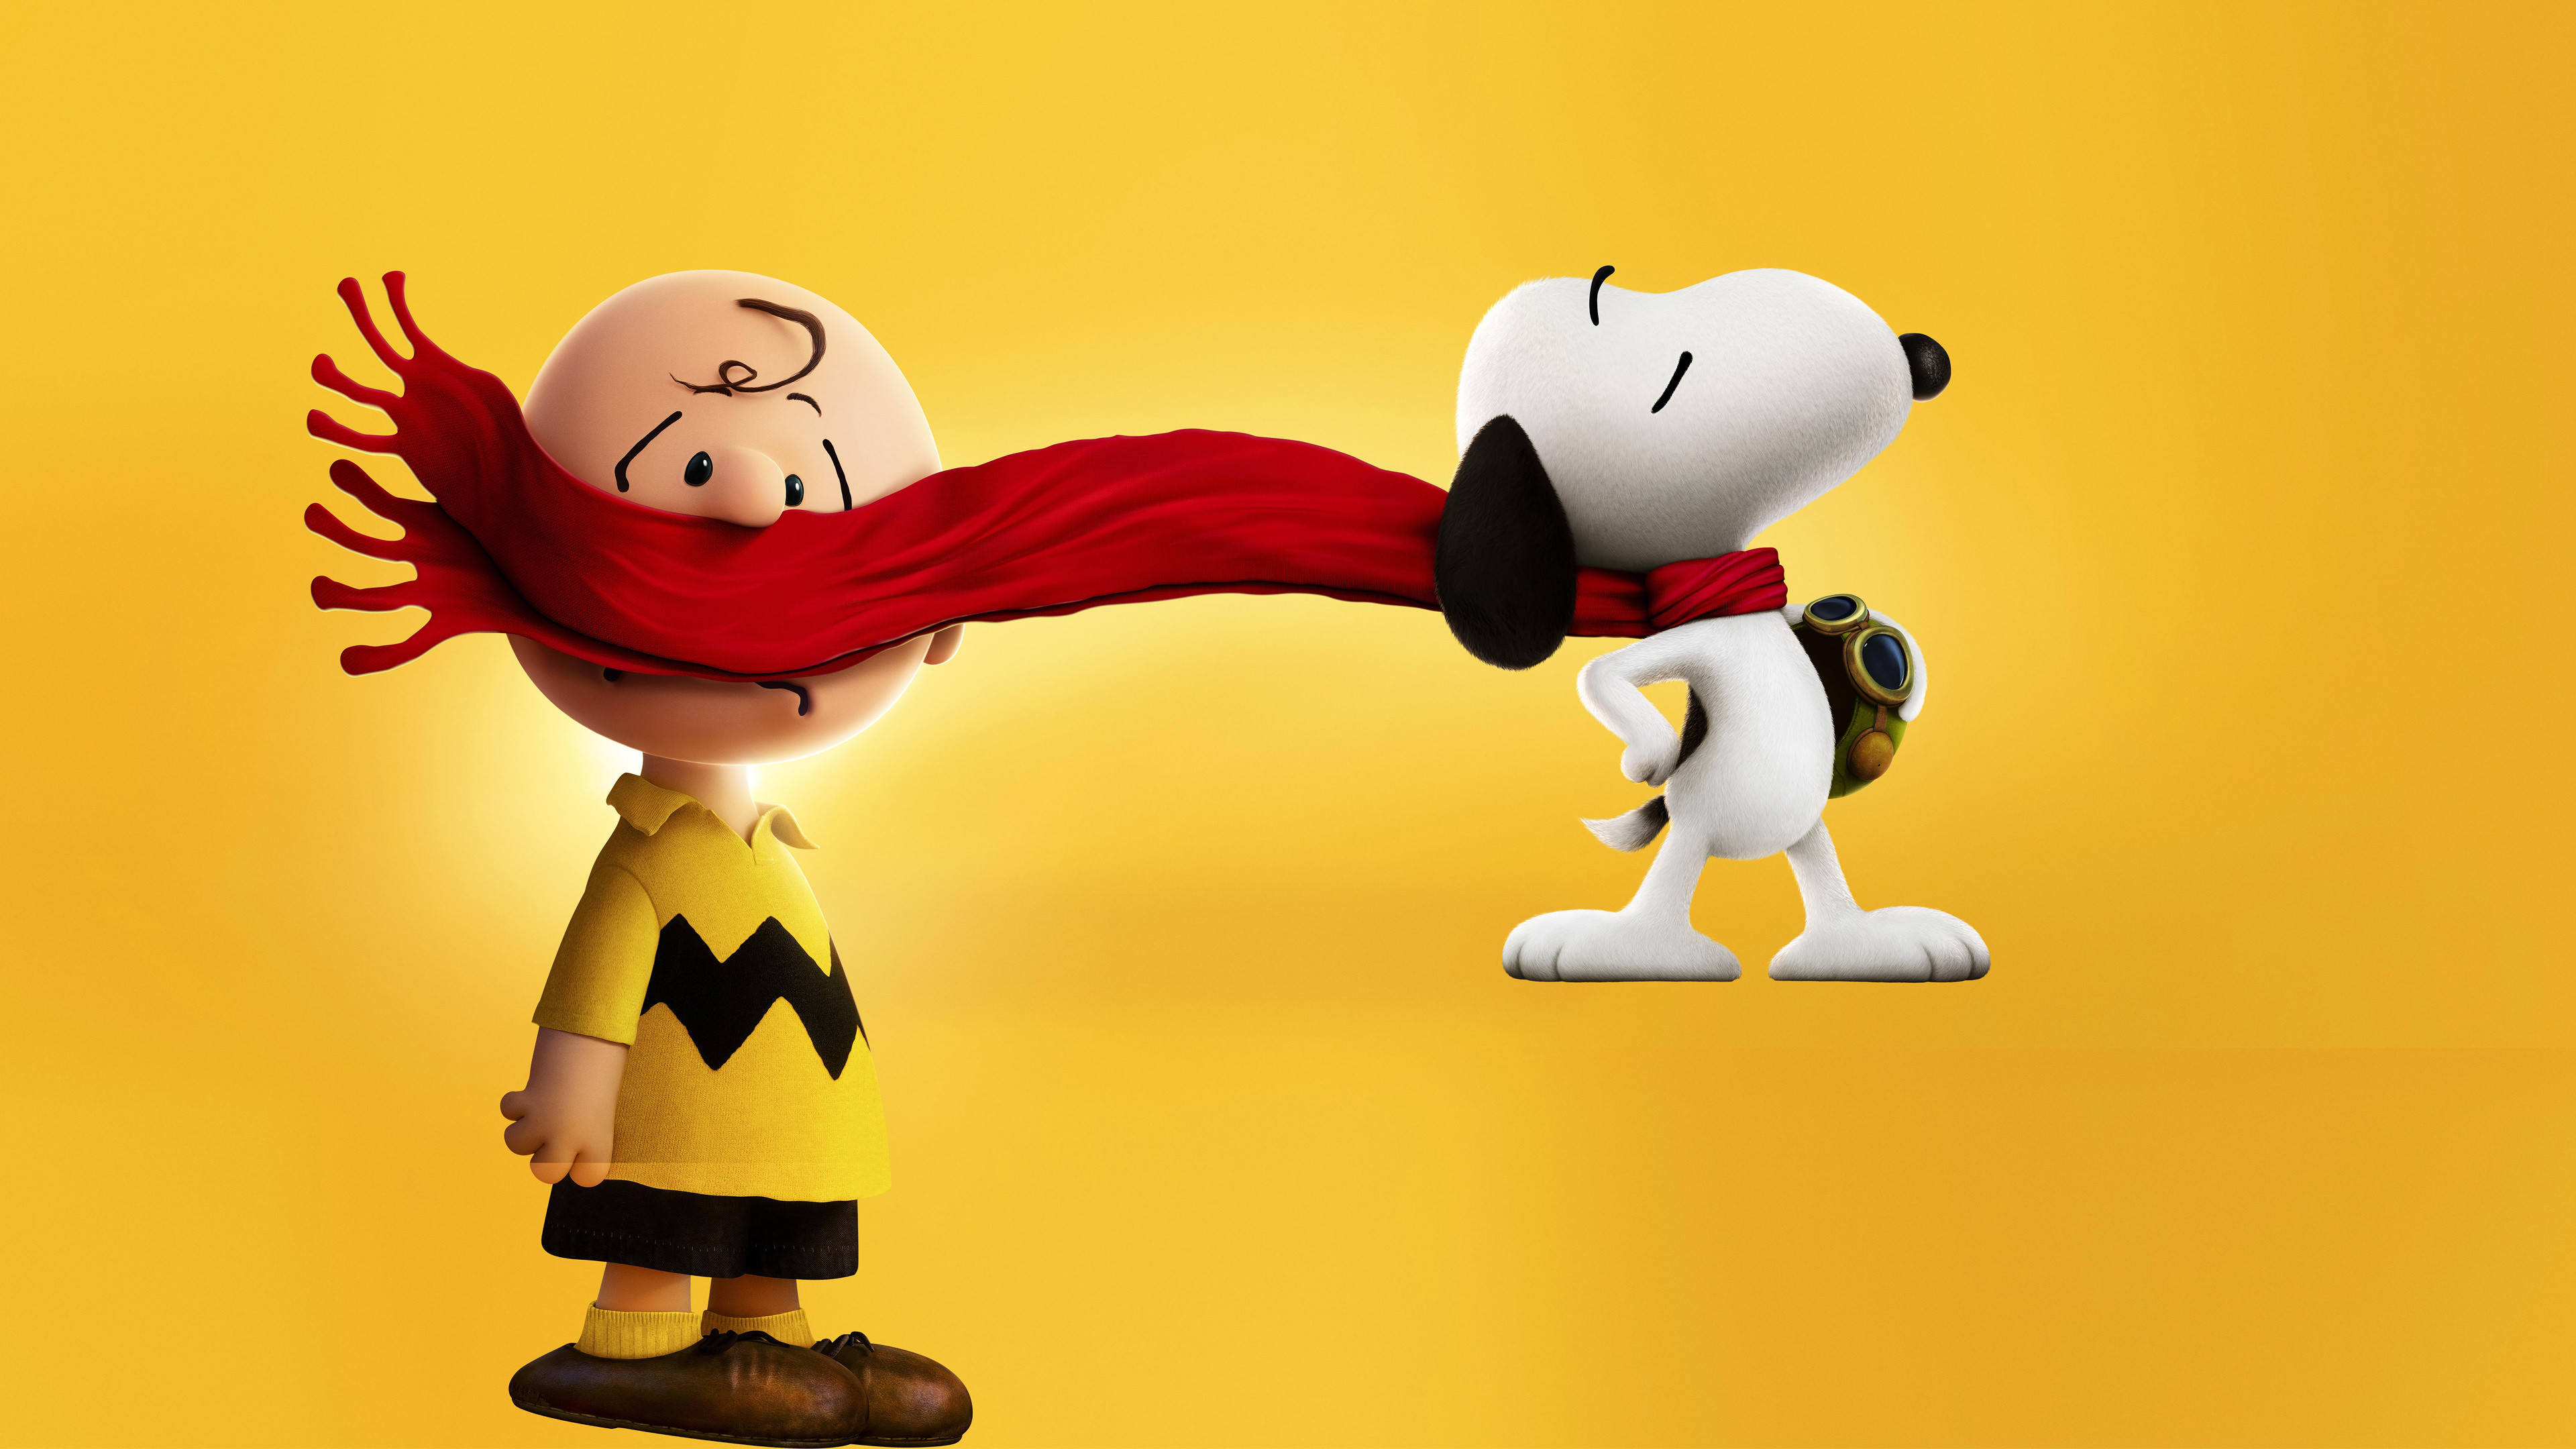 3840x2160 1920x1280 1920x1280 Snoopy HD Wallpapers Backgrounds Wallpaper Imagenes De Snoopy  Wallpapers Wallpapers)